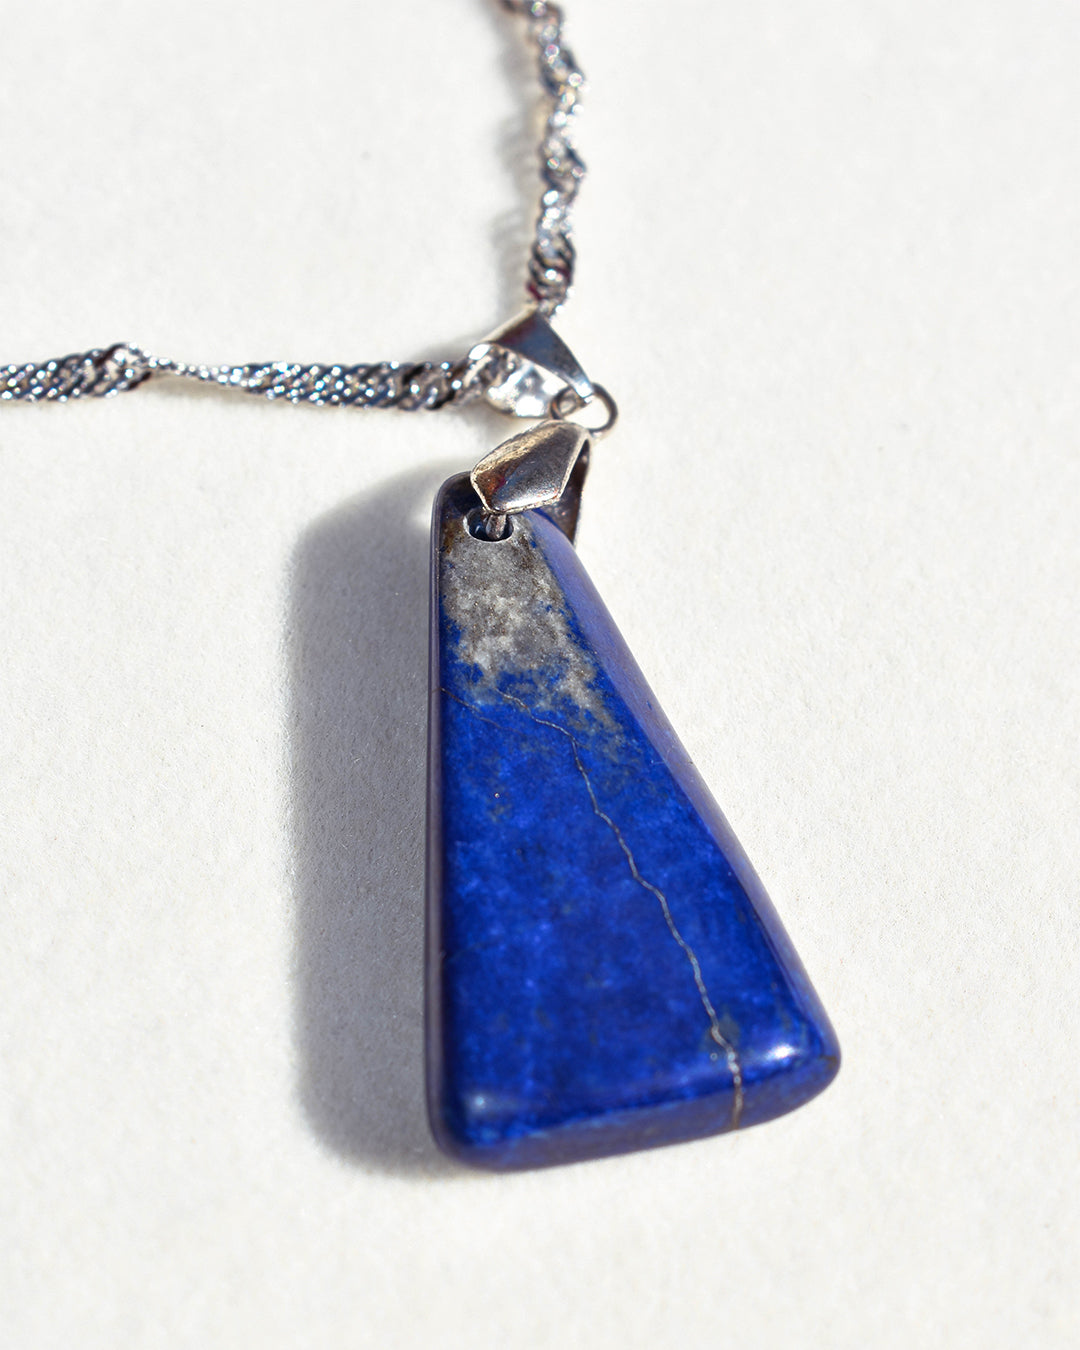 Stainless Steel chain with Lapis Lazuli crystal pendant